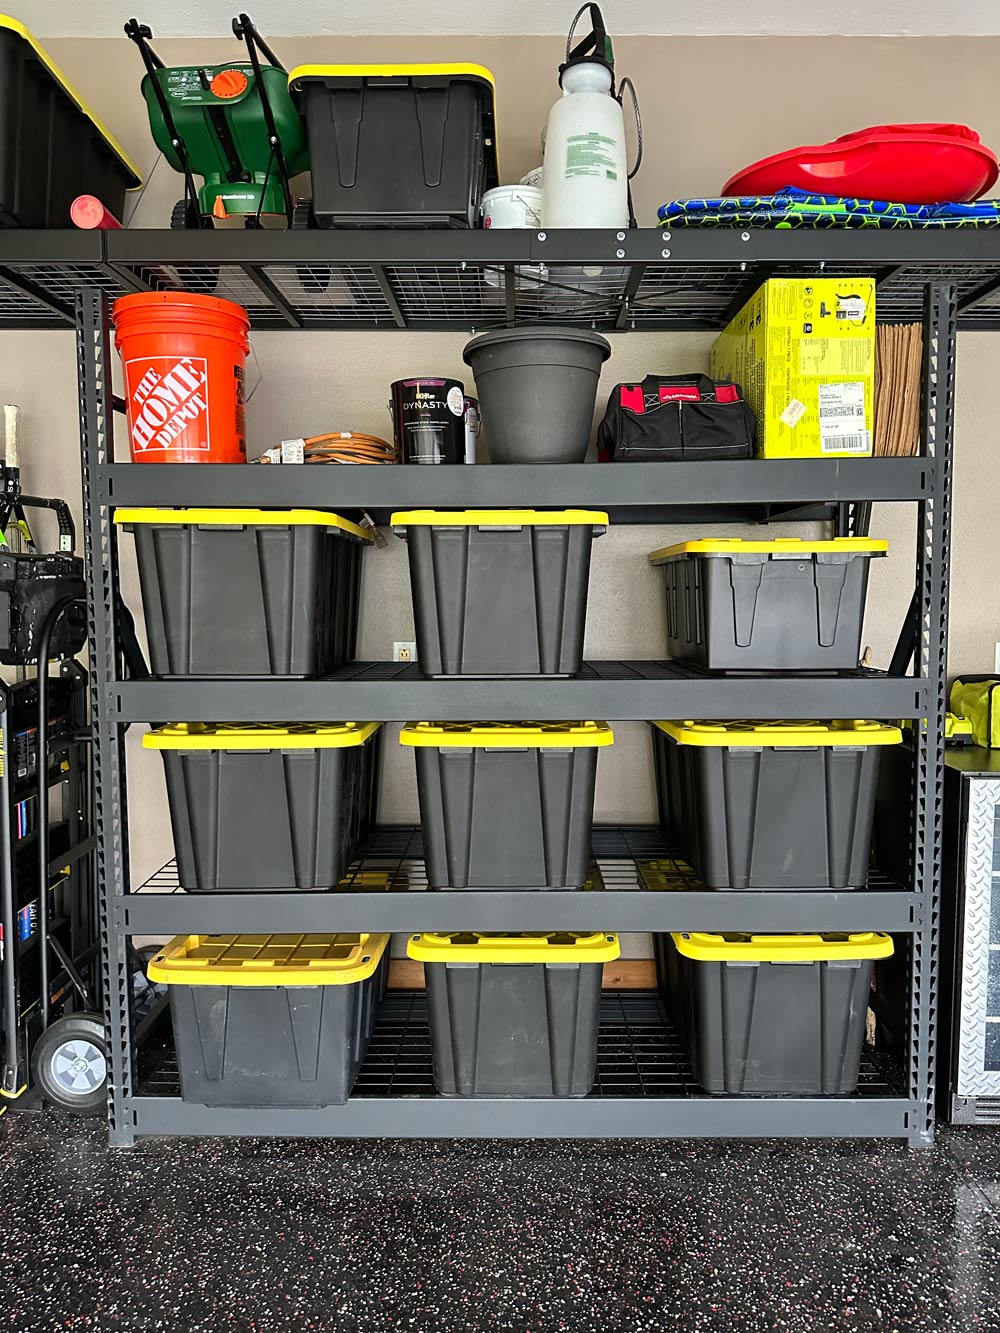 A shelving unit with storage totes, a Homer bucket, and other miscellaneous items.